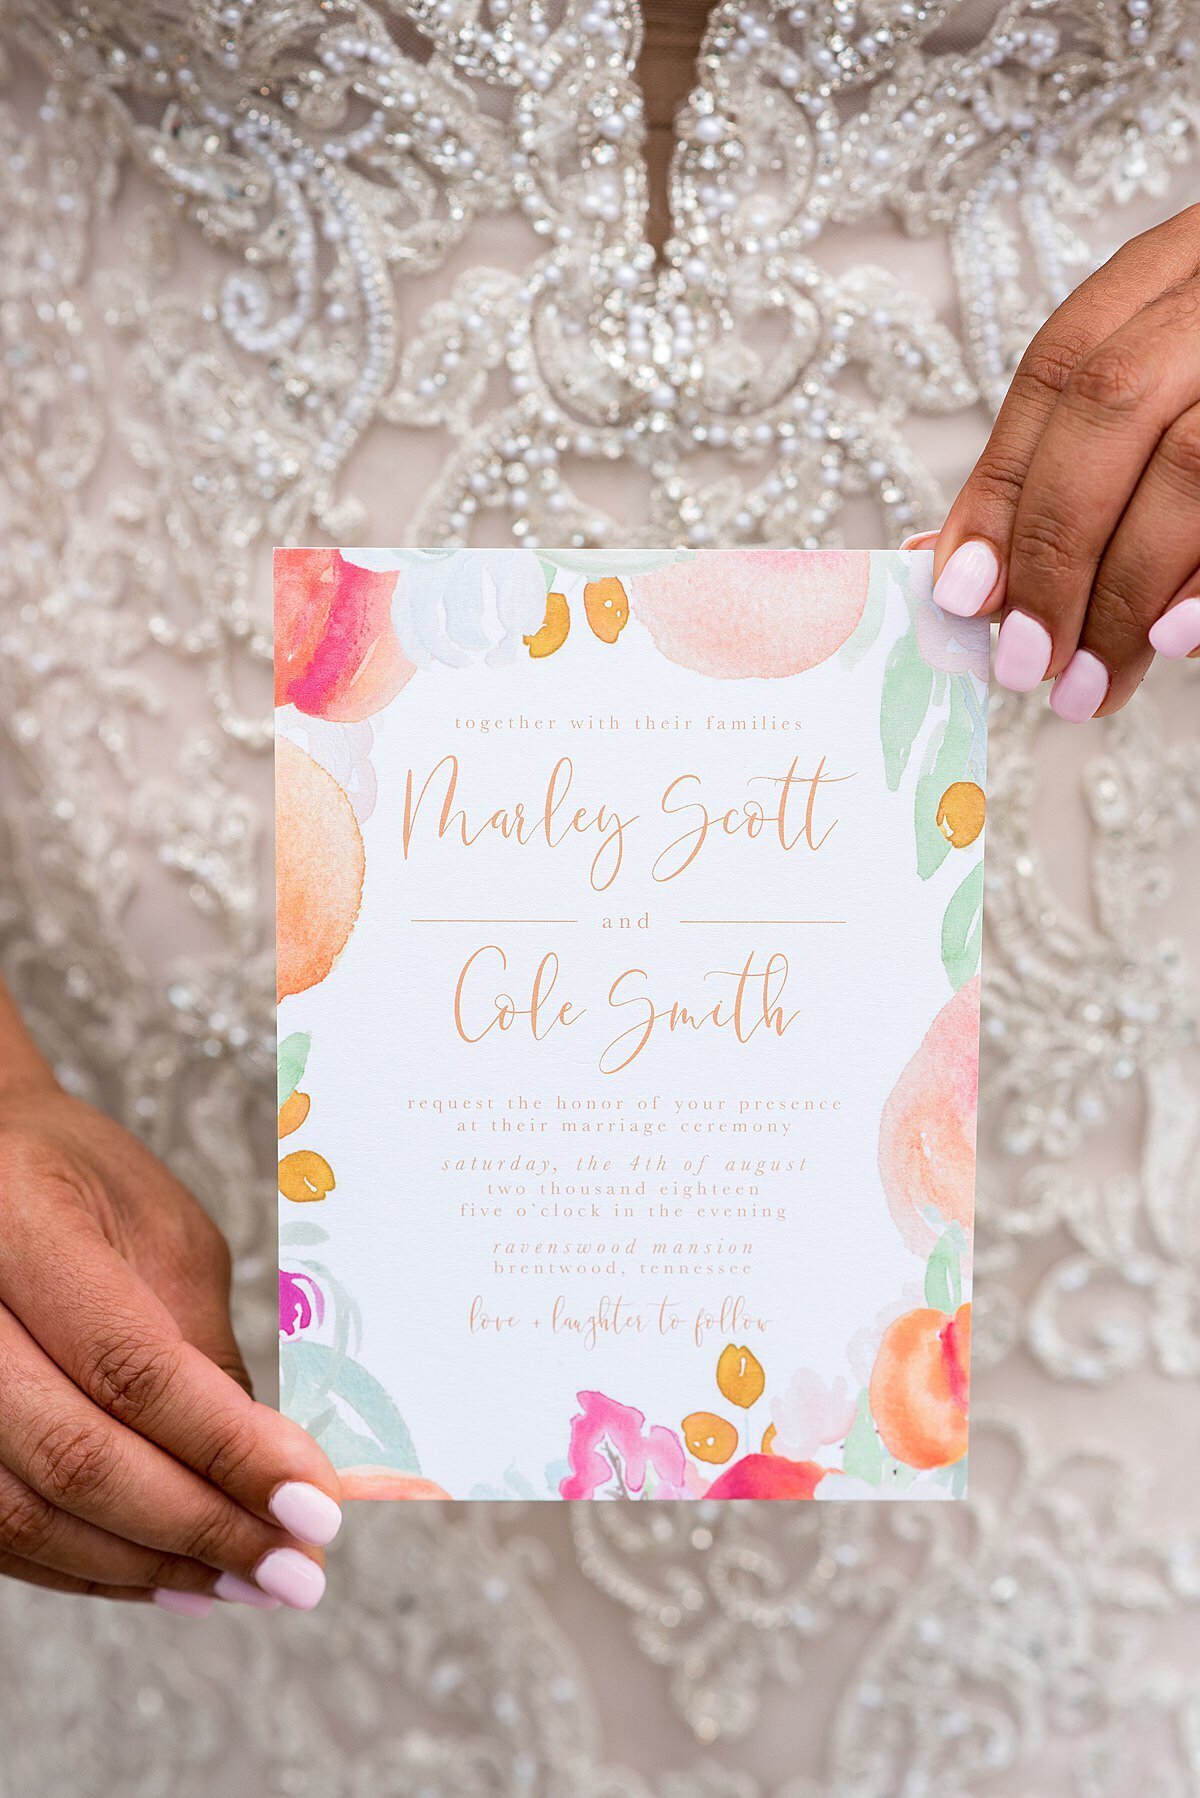 The African American bride, wearing a lace wedding dress, holds a wedding invitation decorated with peaches, pink flowers and green leaves featuring modern calligraphy script at Ravenswood Mansion